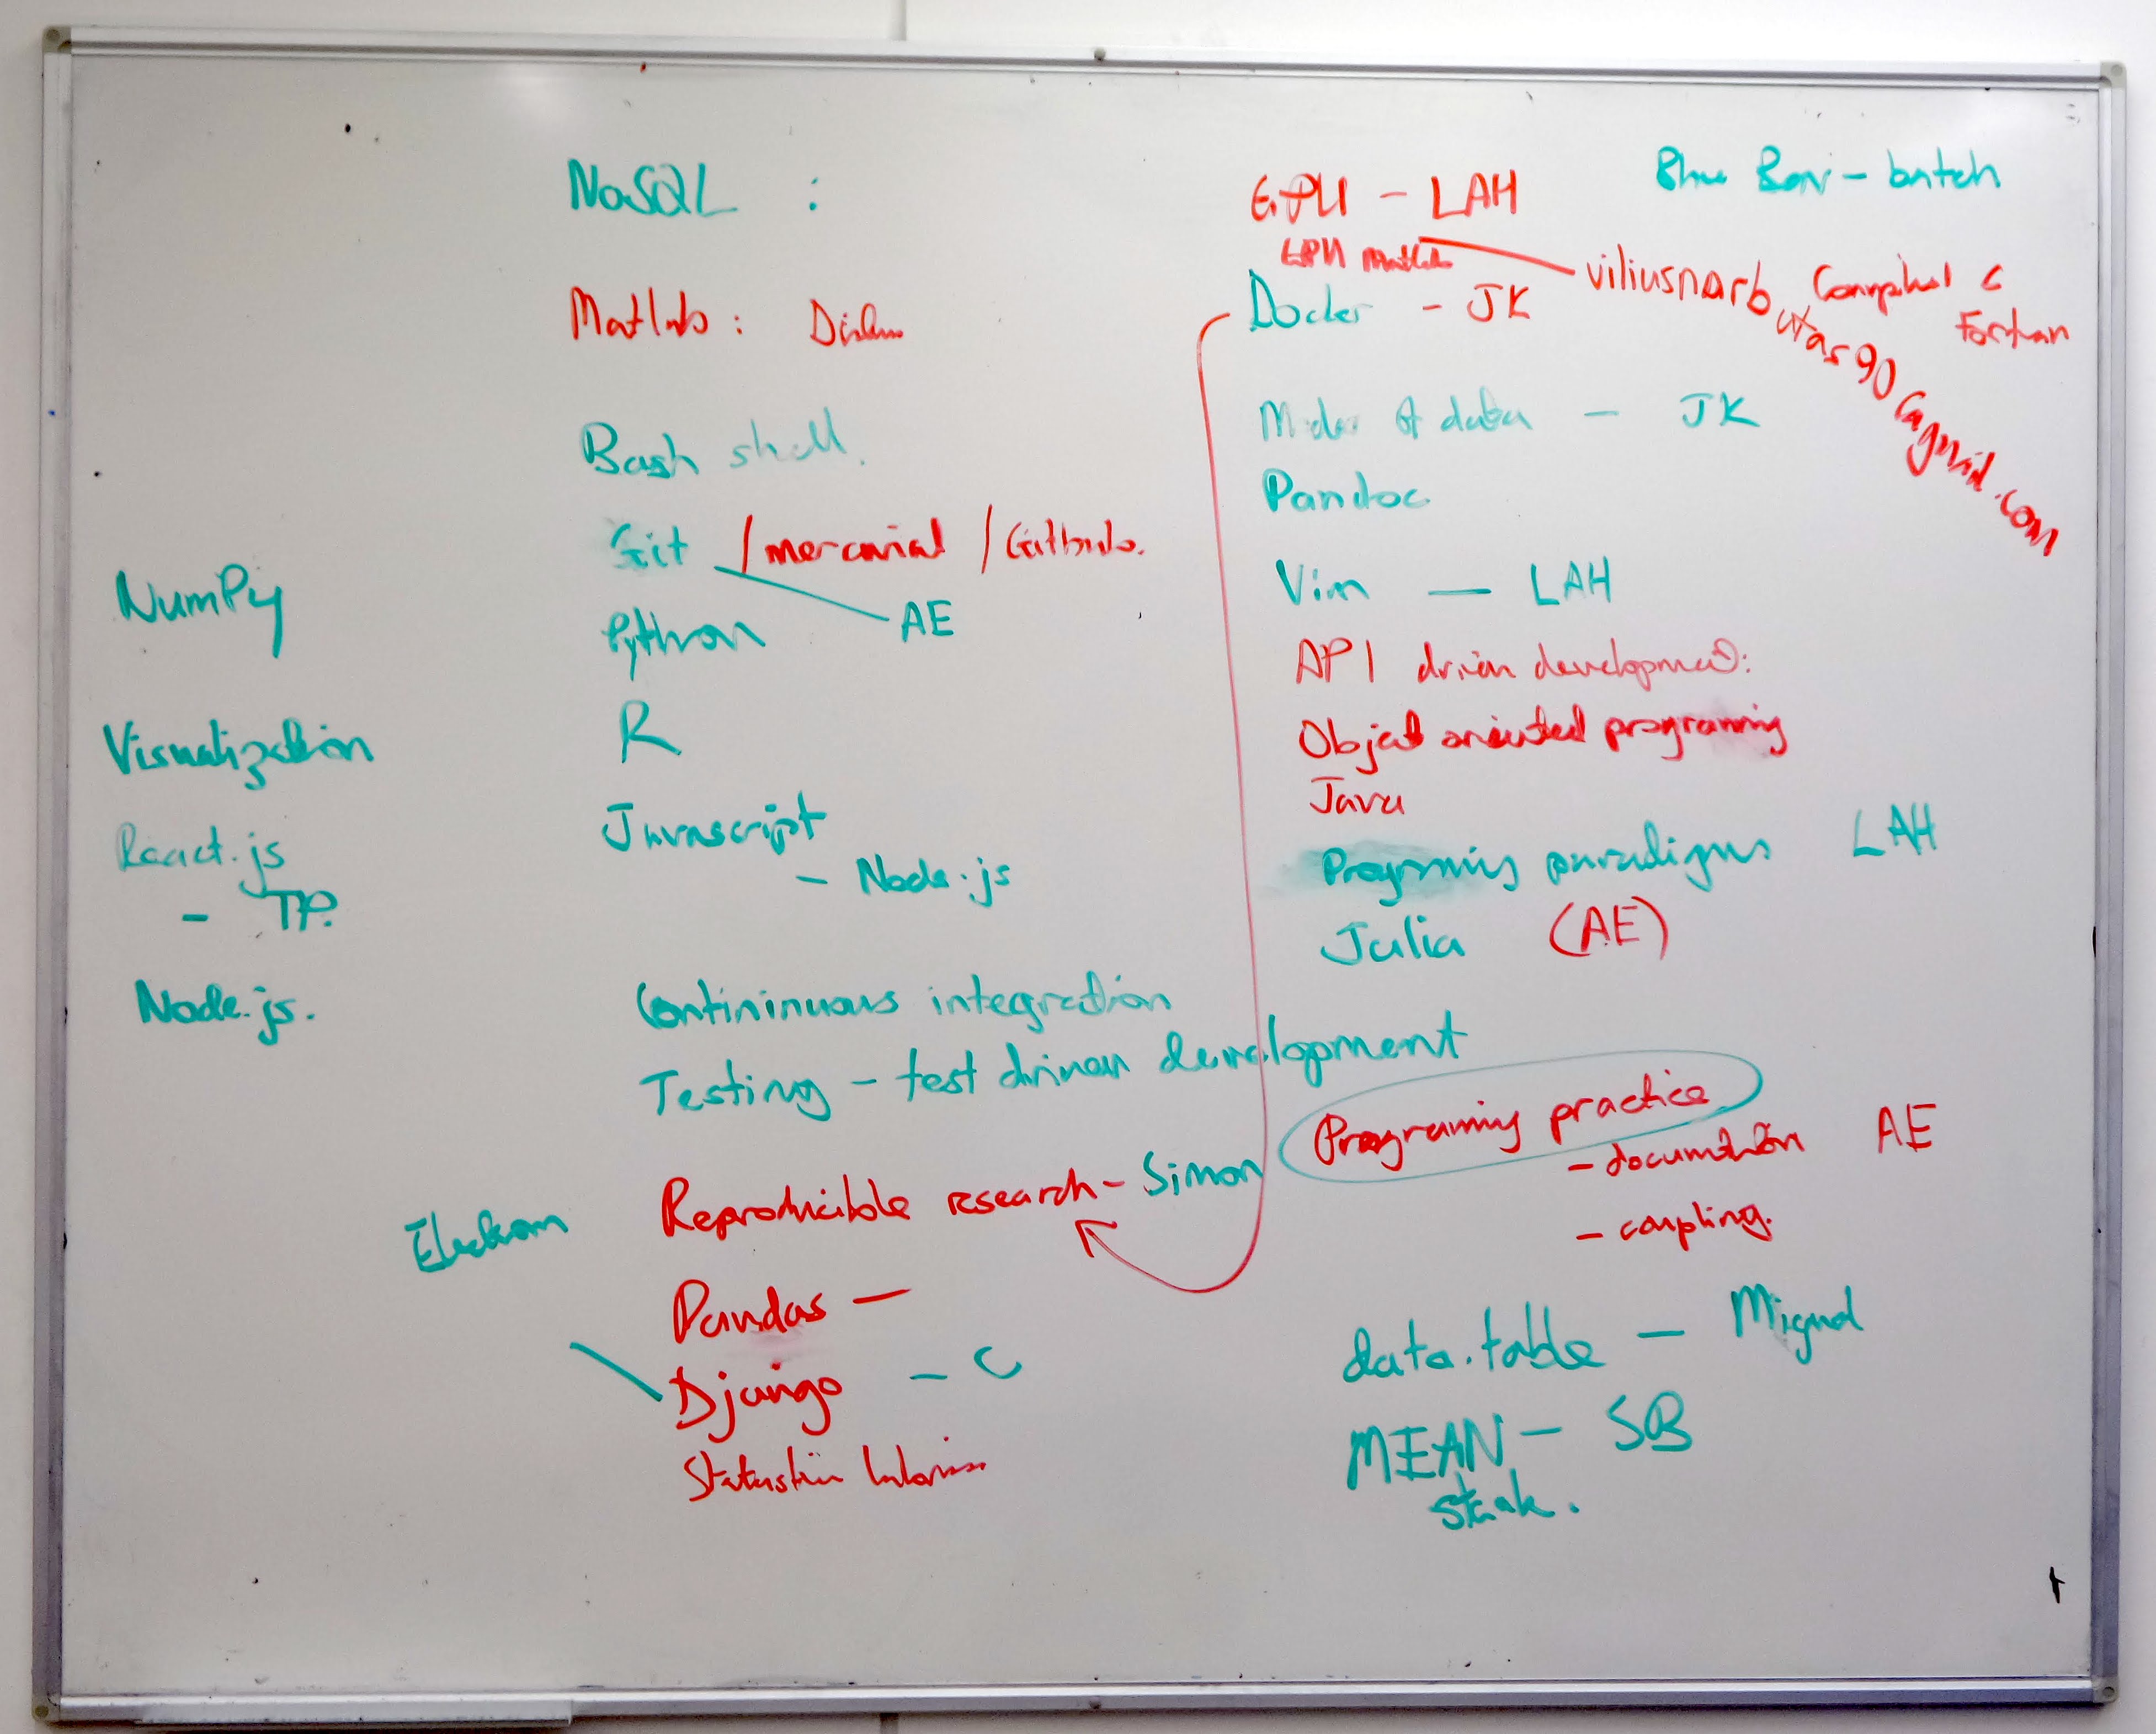 Photo of the whiteboard listing
topics